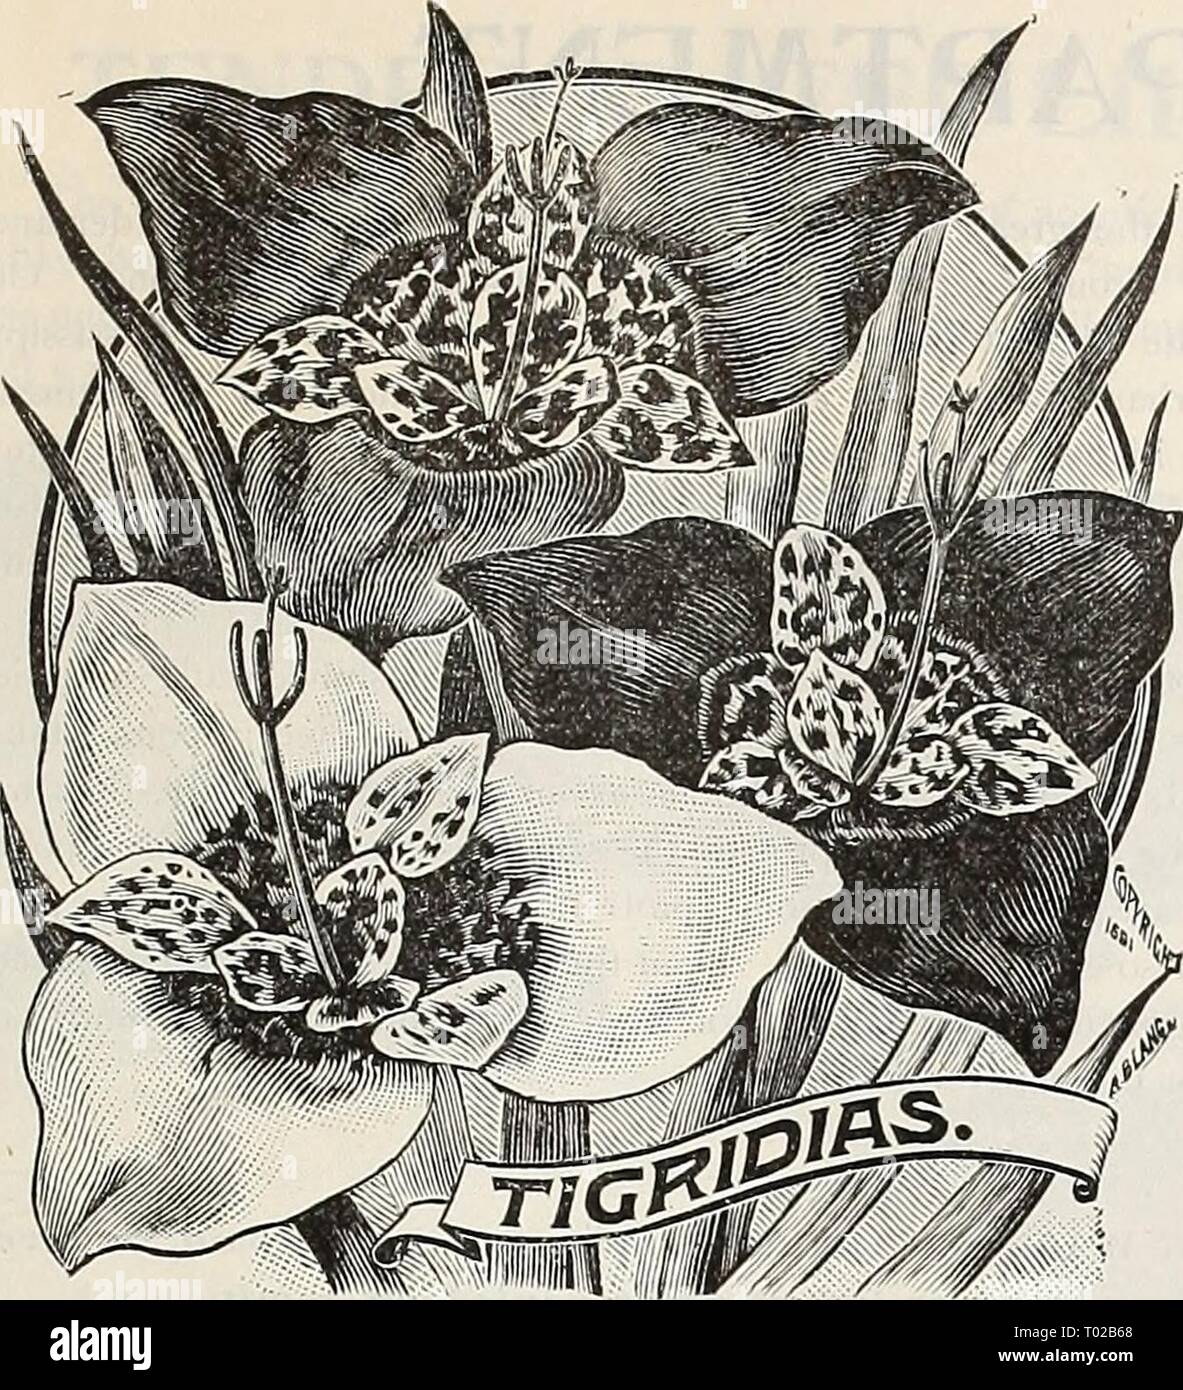 Dreer's garden calendar : 1899 . dreersgardencale1899henr Year: 1899  DREER'S SUMMER FLOWERING BULBS. 95    LILIUMS. ISMENE CALATHINA. (Pancratium.) A grand Summer flowering bulb, pro- ducing throughout the season large Ama- ryllis-like, pure white, fragrant blossoms. Keep the bulbs in a dry, warm place, and plant out in June. Bulbs can be taken up in October, and, after a few weeks' rest, potted and flowered in the house in Winter, or kept over for planting out another season. (See cut.) 25 cts. each ; §2.50 per dozen. TIGRIDIAS. (Tiger or Shell Flower.) These gorgeous Summer-flowering bulbs  Stock Photo